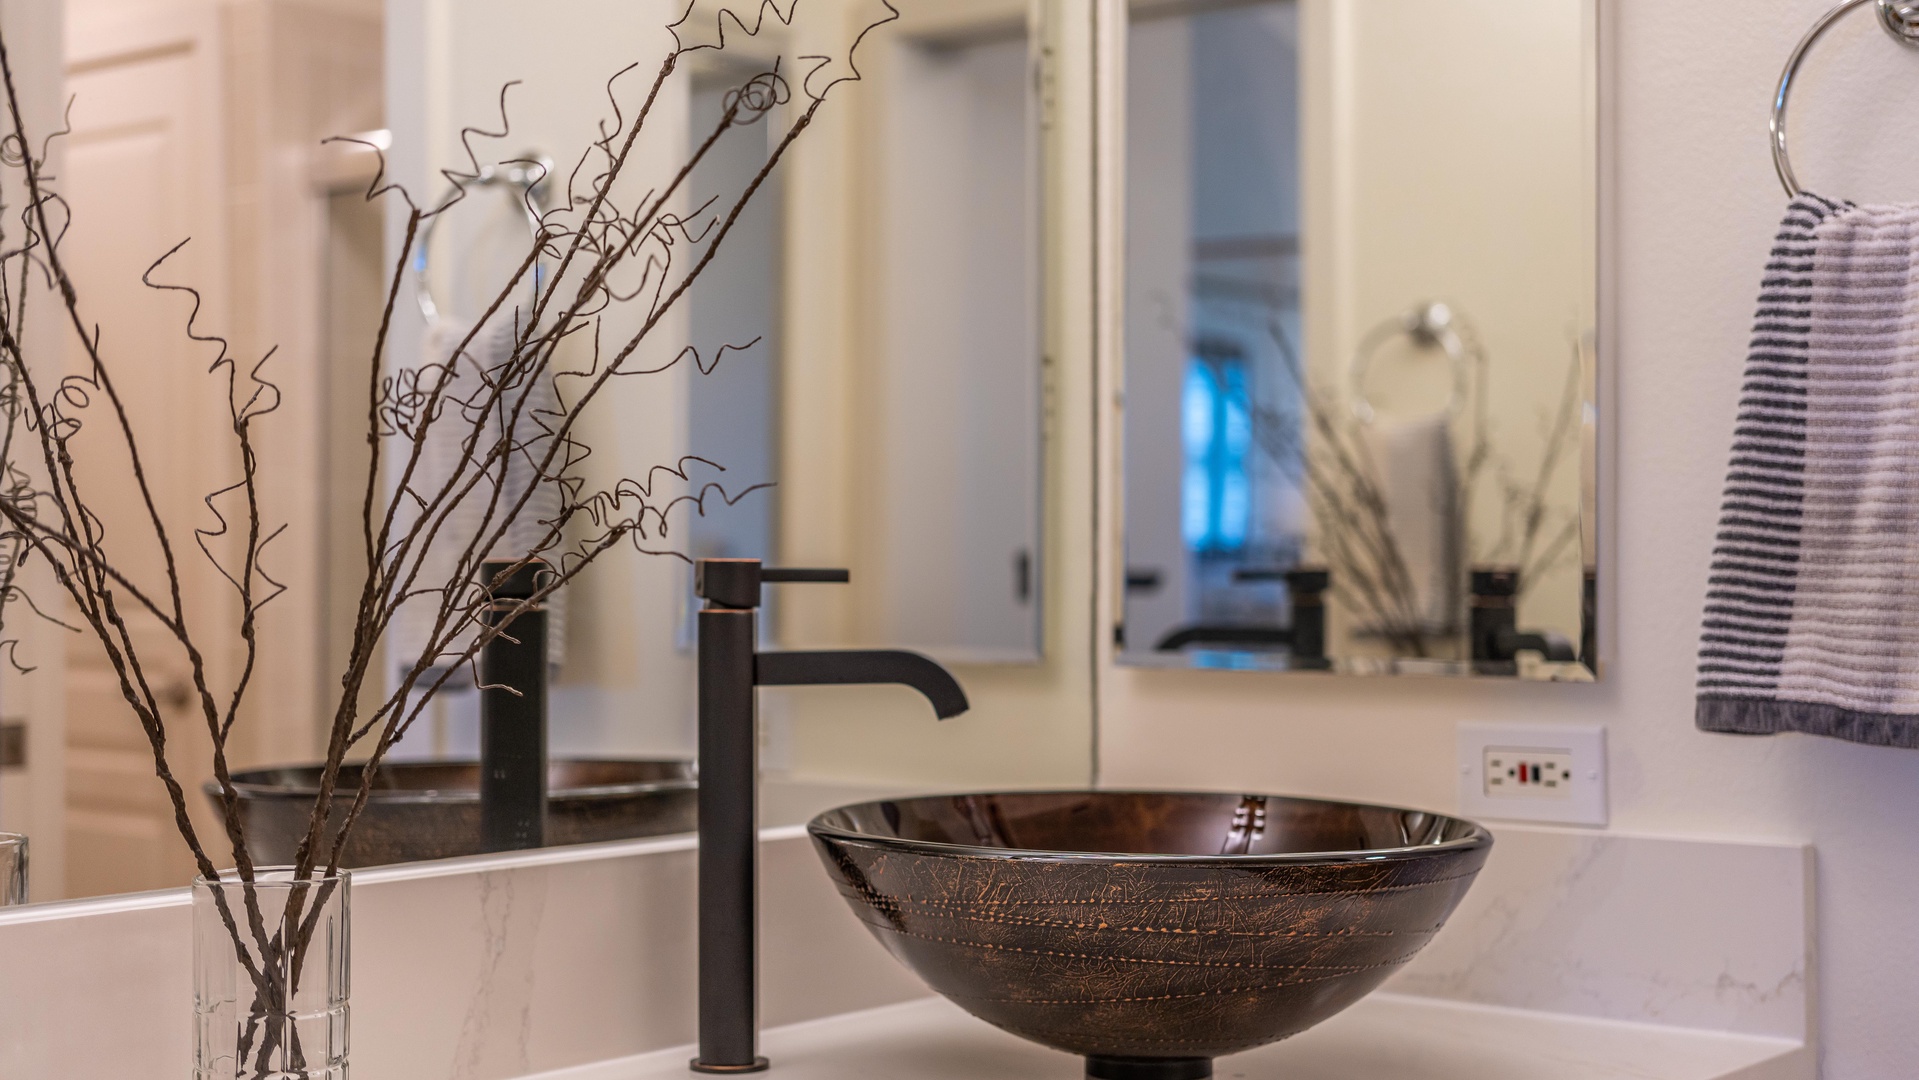 Kapolei Vacation Rentals, Kai Lani 20C - The primary guest bathroom with bold designs and contoured vanity sinks.